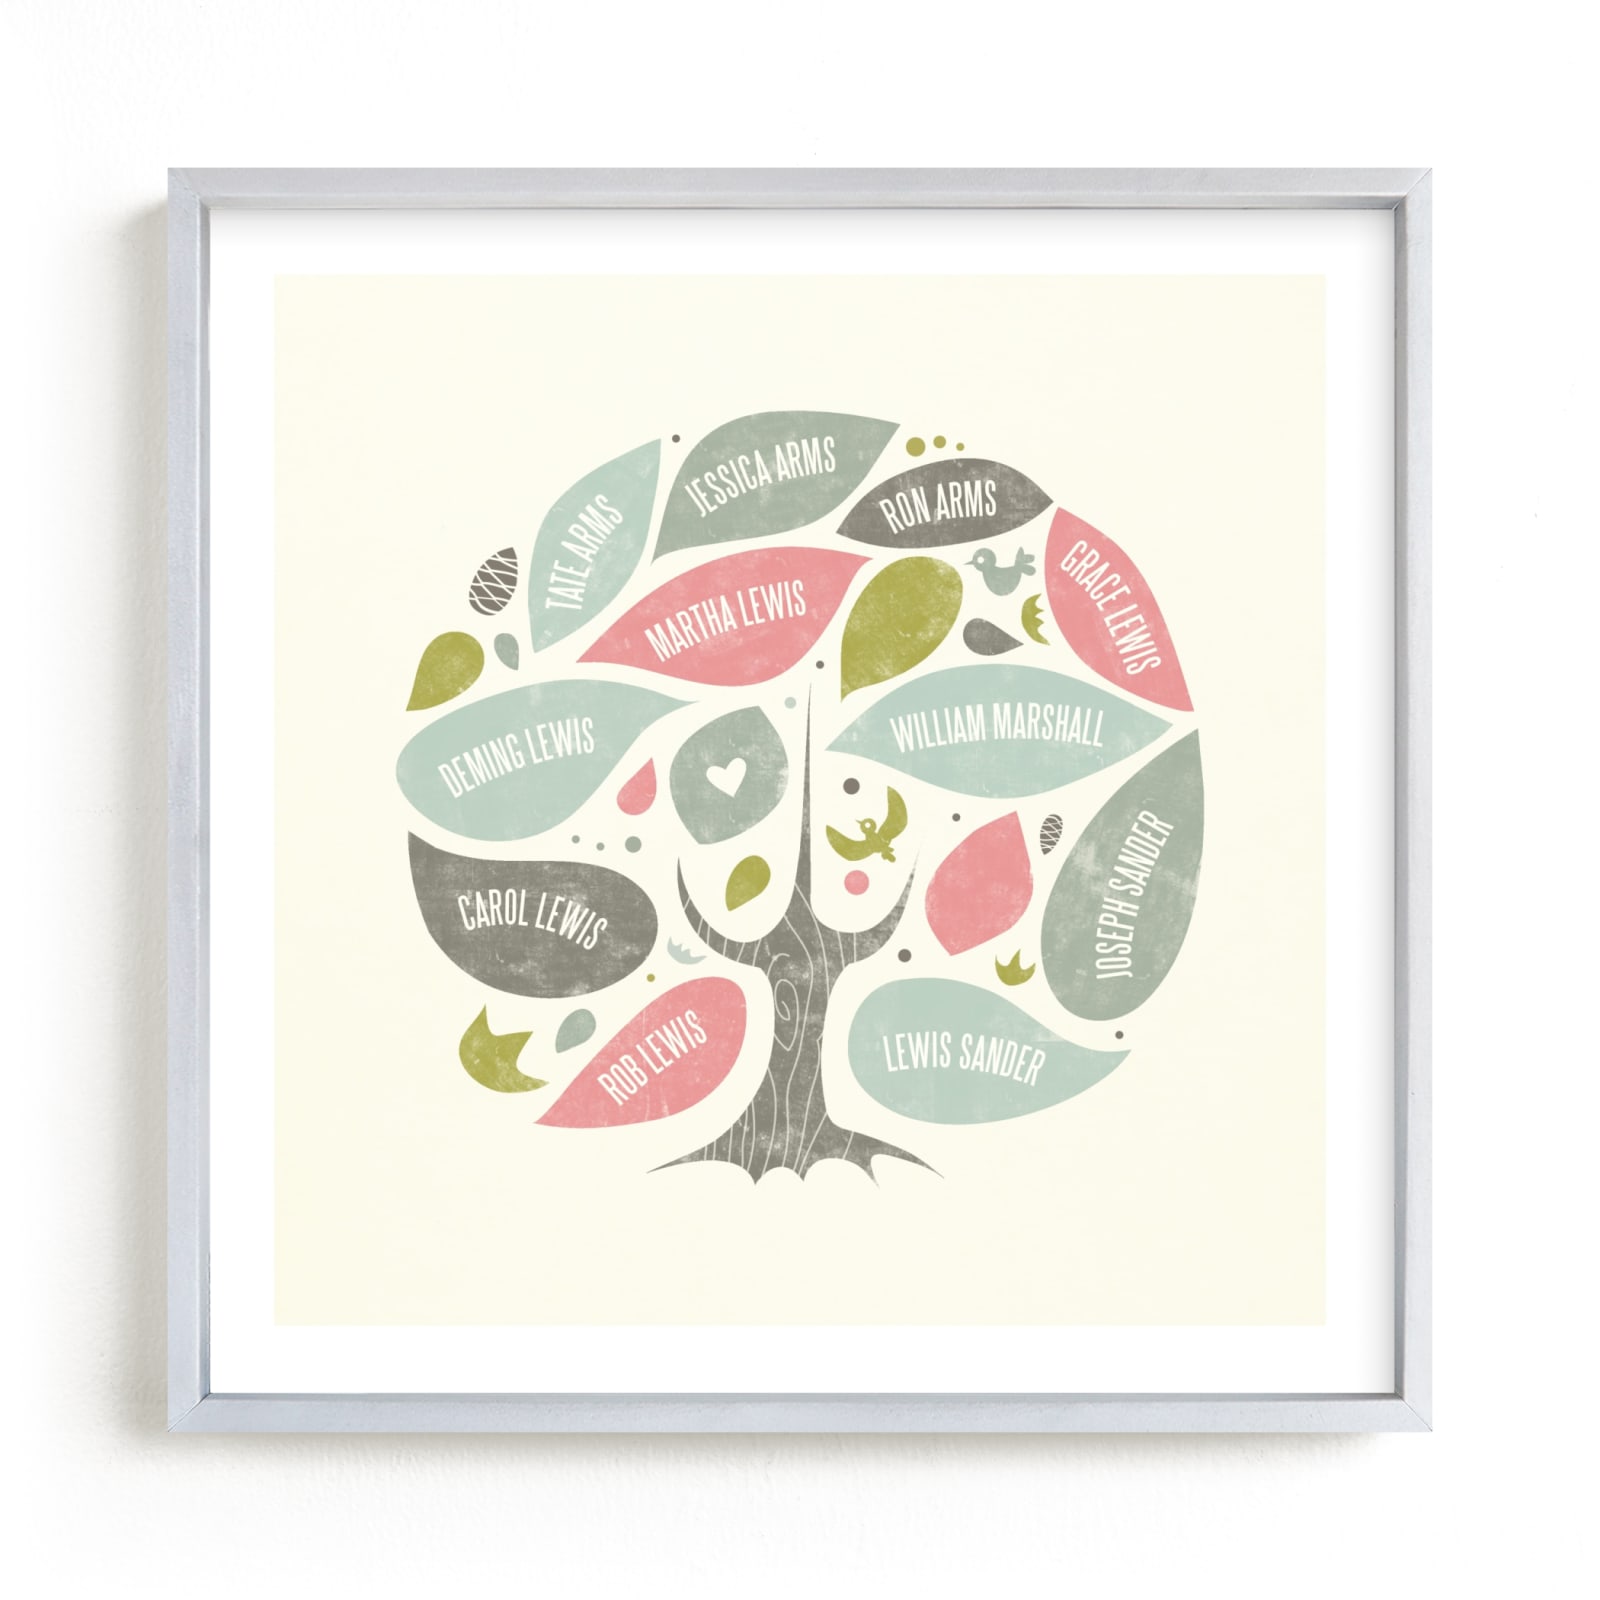 This is a pink family tree art by Heather Francisco called Folk Family Tree.